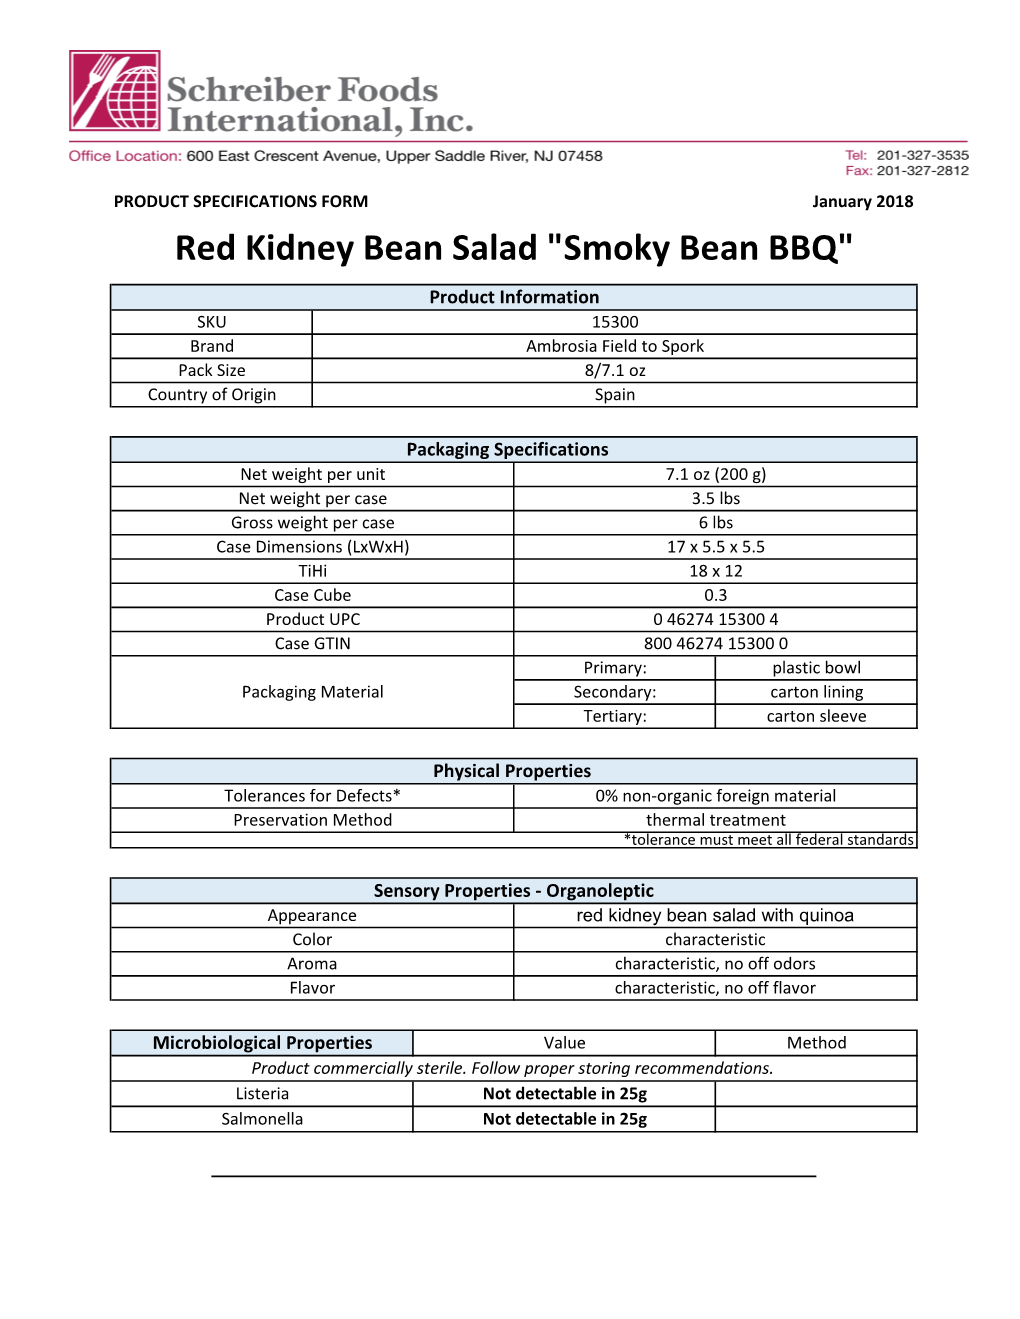 Red Kidney Bean Salad "Smoky Bean BBQ" Product Information SKU 15300 Brand Ambrosia Field to Spork Pack Size 8/7.1 Oz Country of Origin Spain